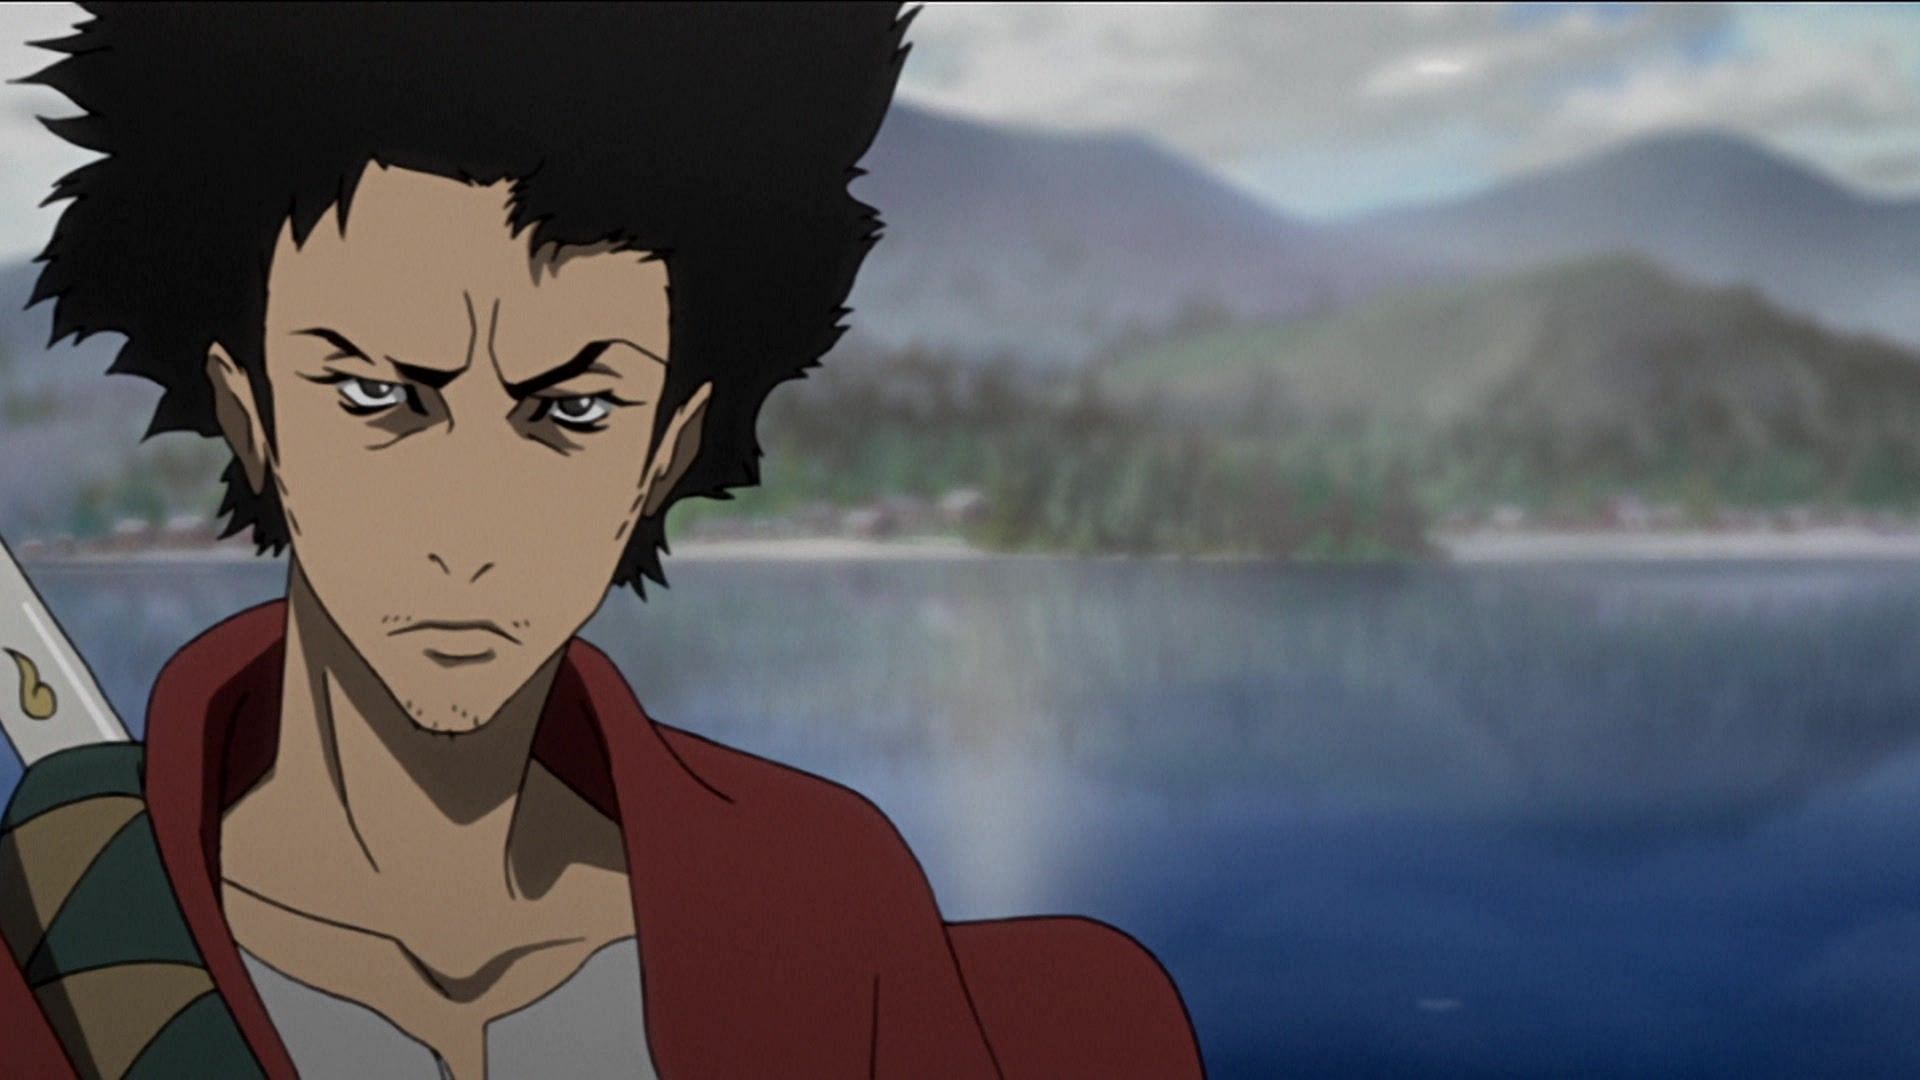 Mugen as seen in the show (Image via Studio Manglobe)